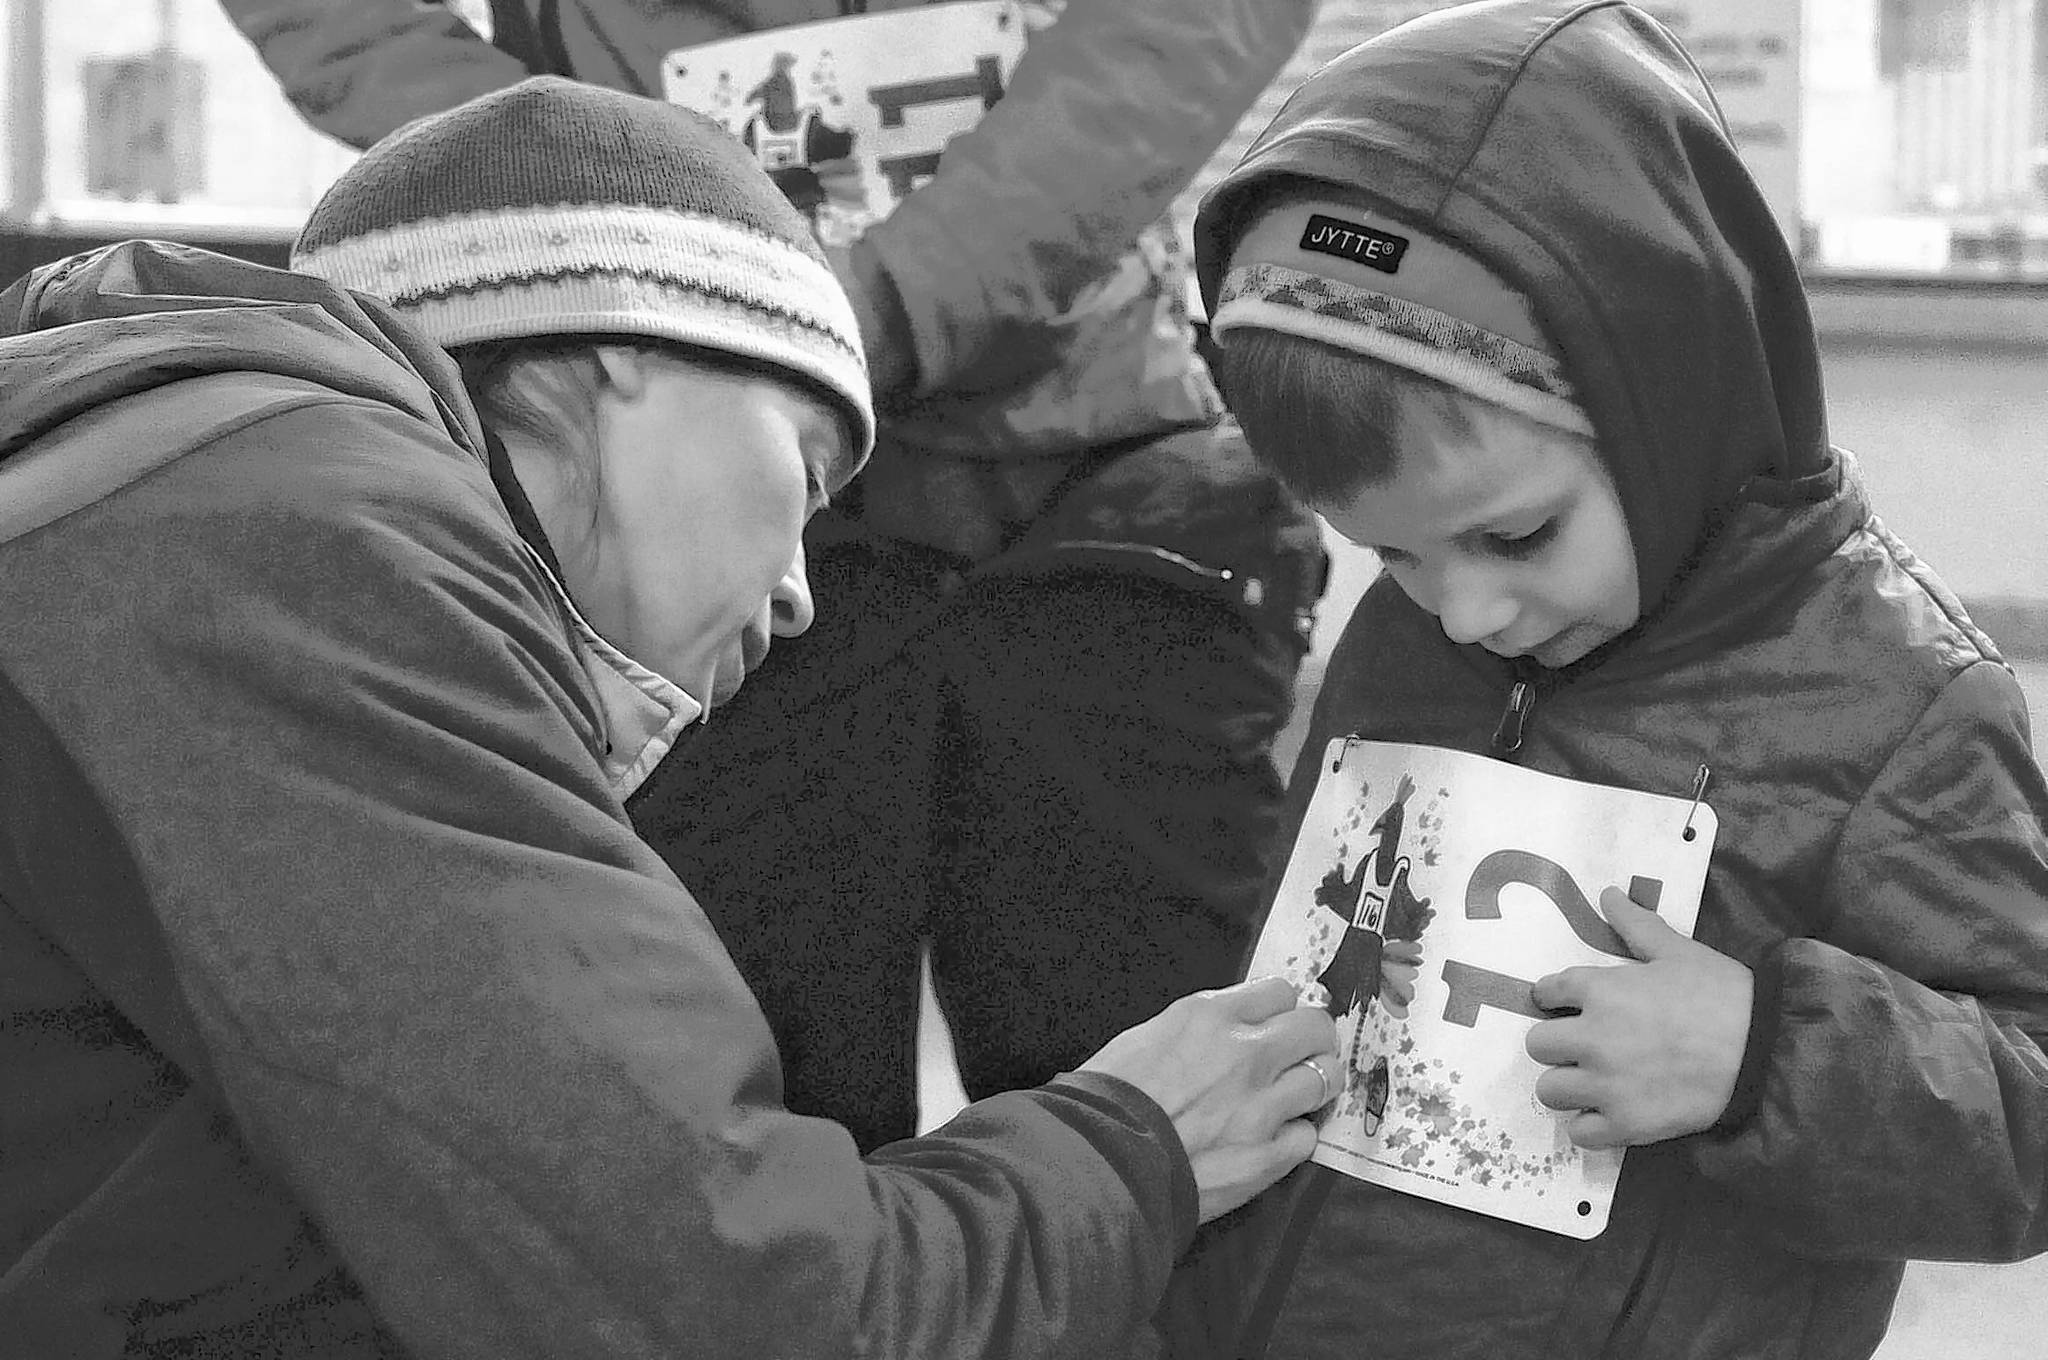 Carly Reimer pins a bib on her son Gus Reimer, 4, for the 1-mile run at the Turkey Trot run held at the Soldotna Regional Sports Complex on Thursday in Soldotna. (Photo by Elizabeth Earl/Peninsula Clarion)